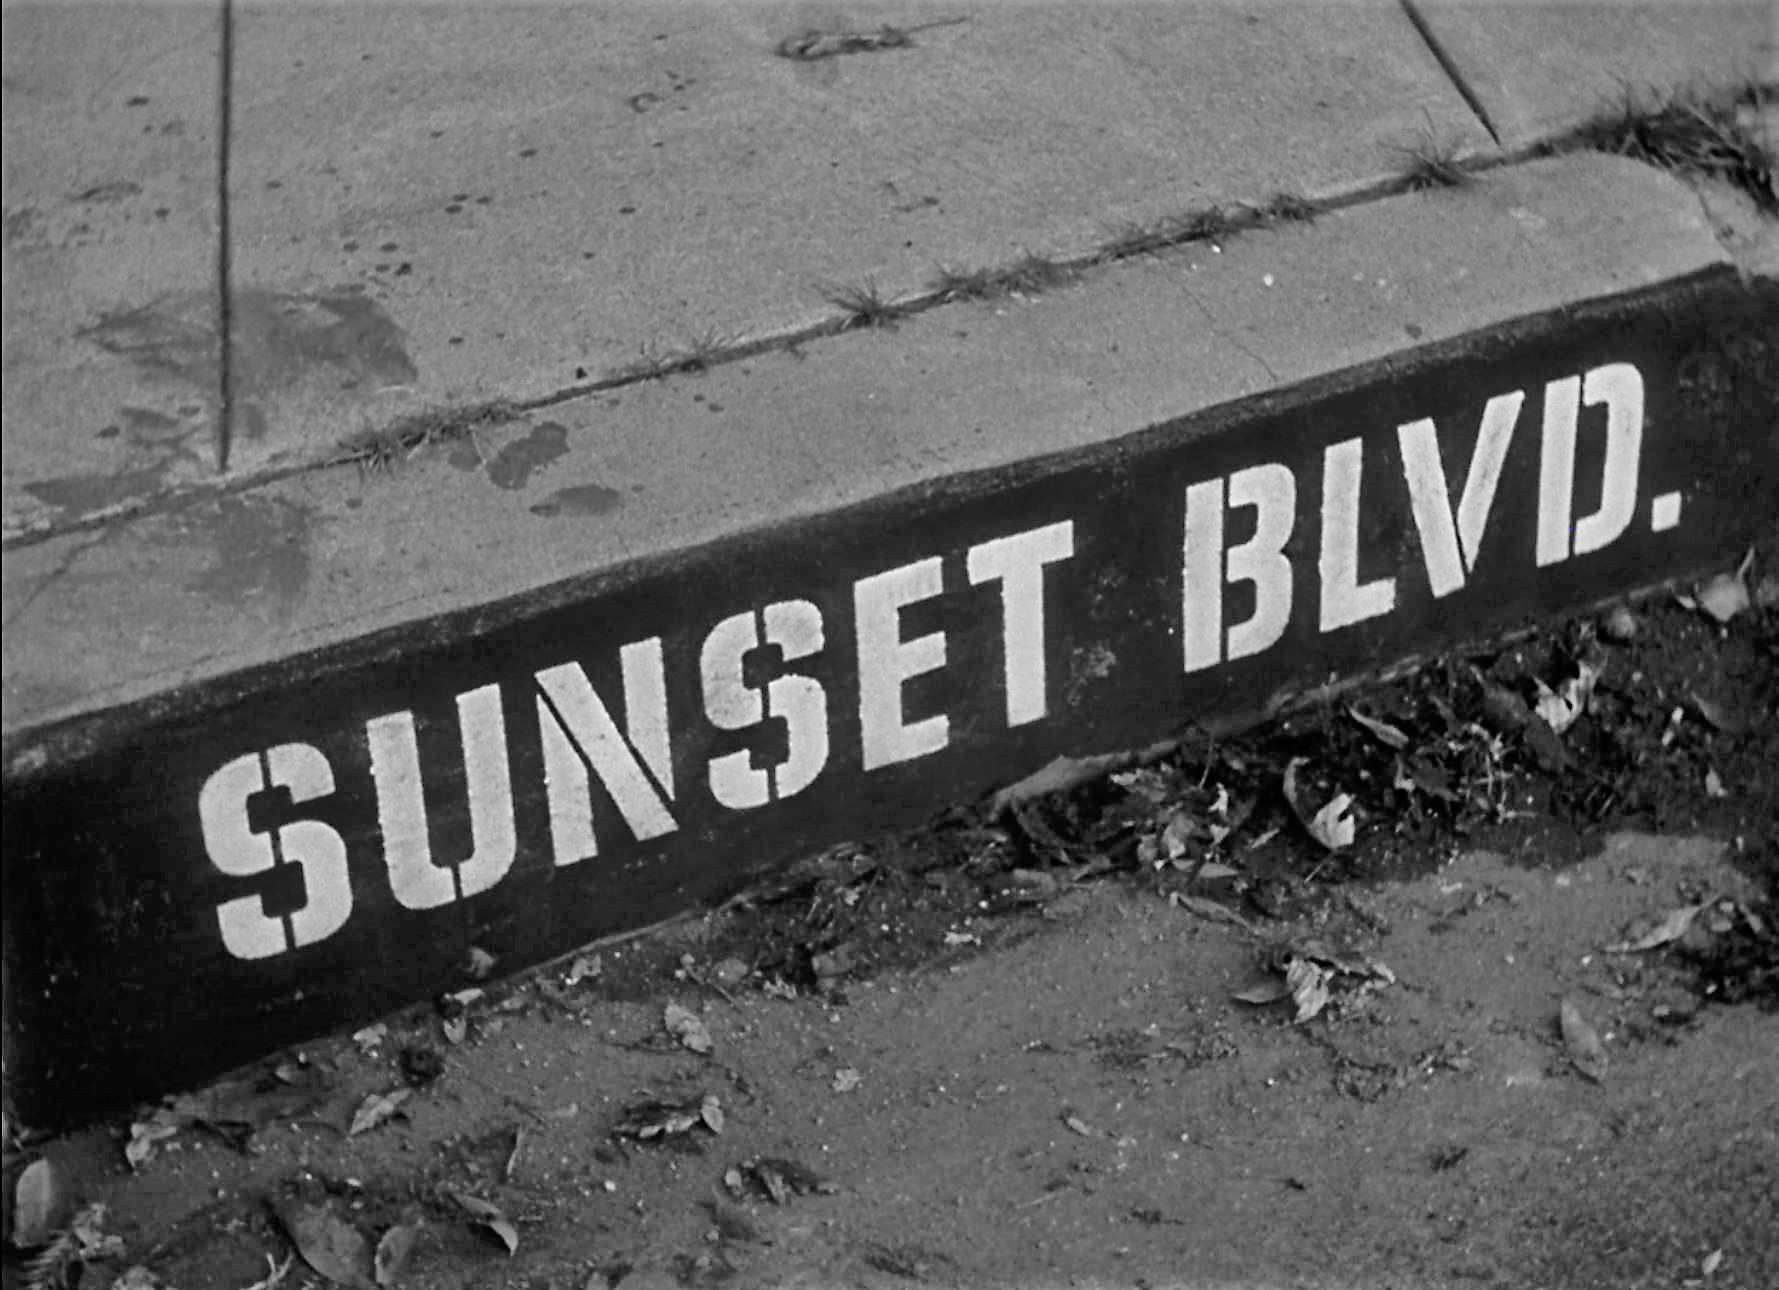 DREAMS ARE WHAT LE CINEMA IS FOR: SUNSET BOULEVARD 1950